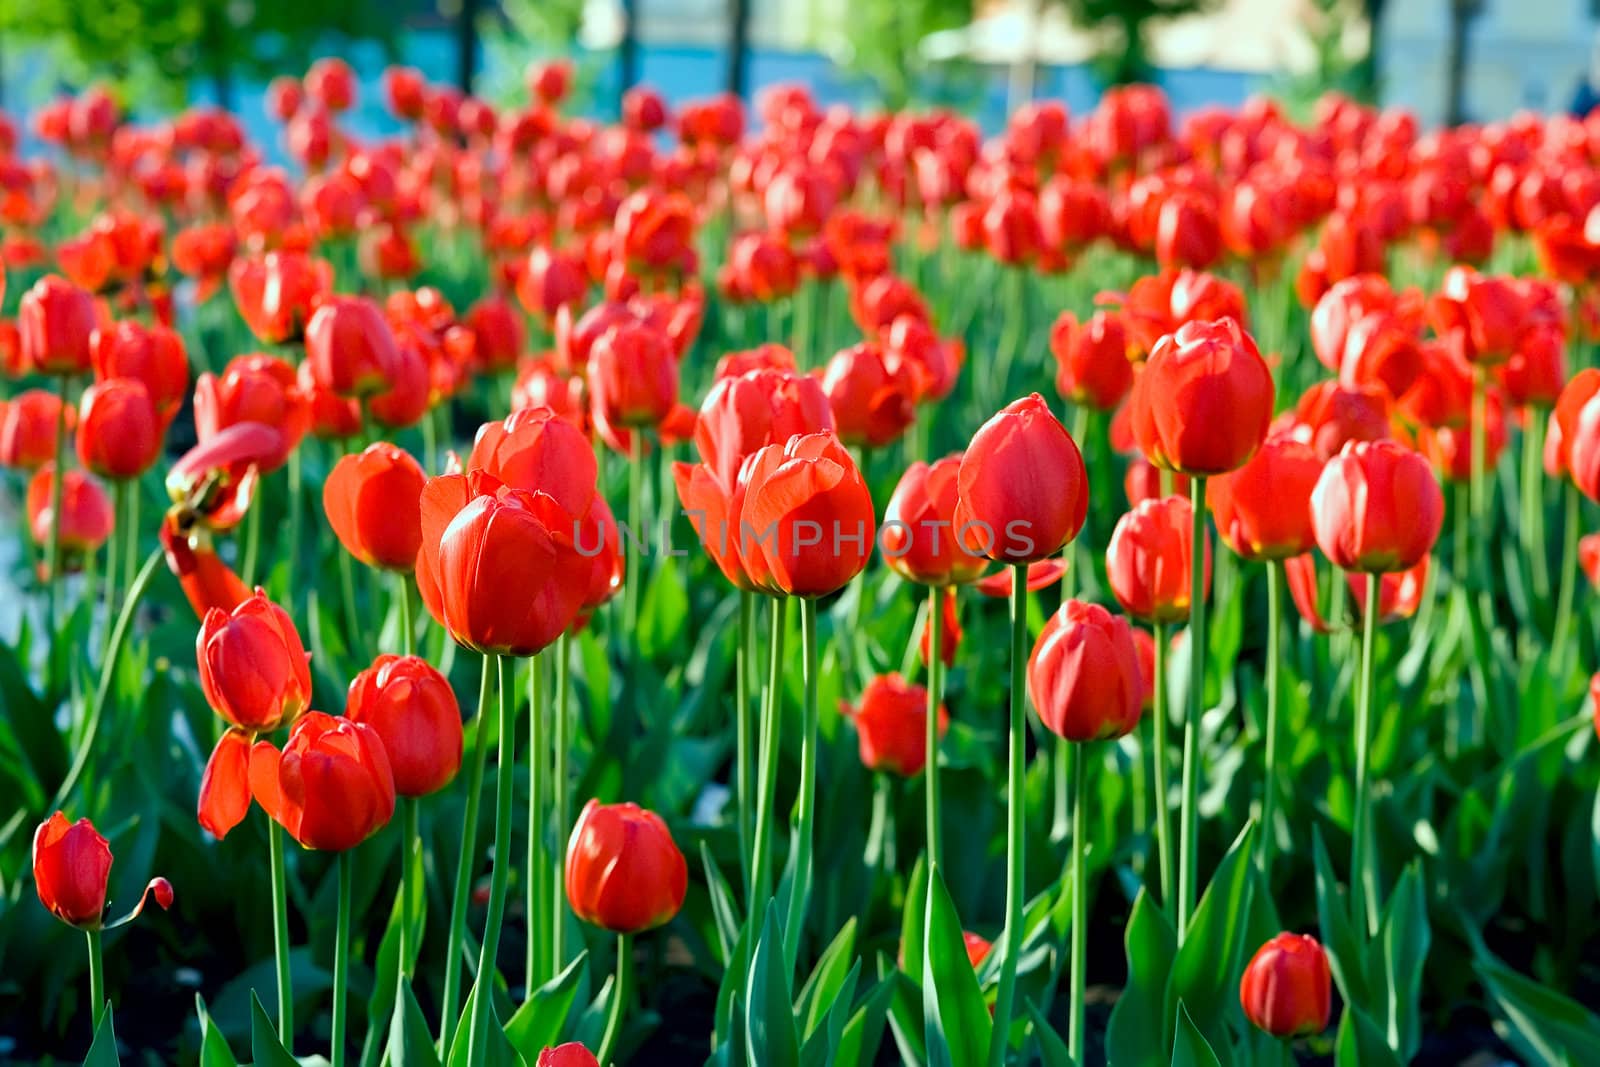 Red Tulips by Sergius